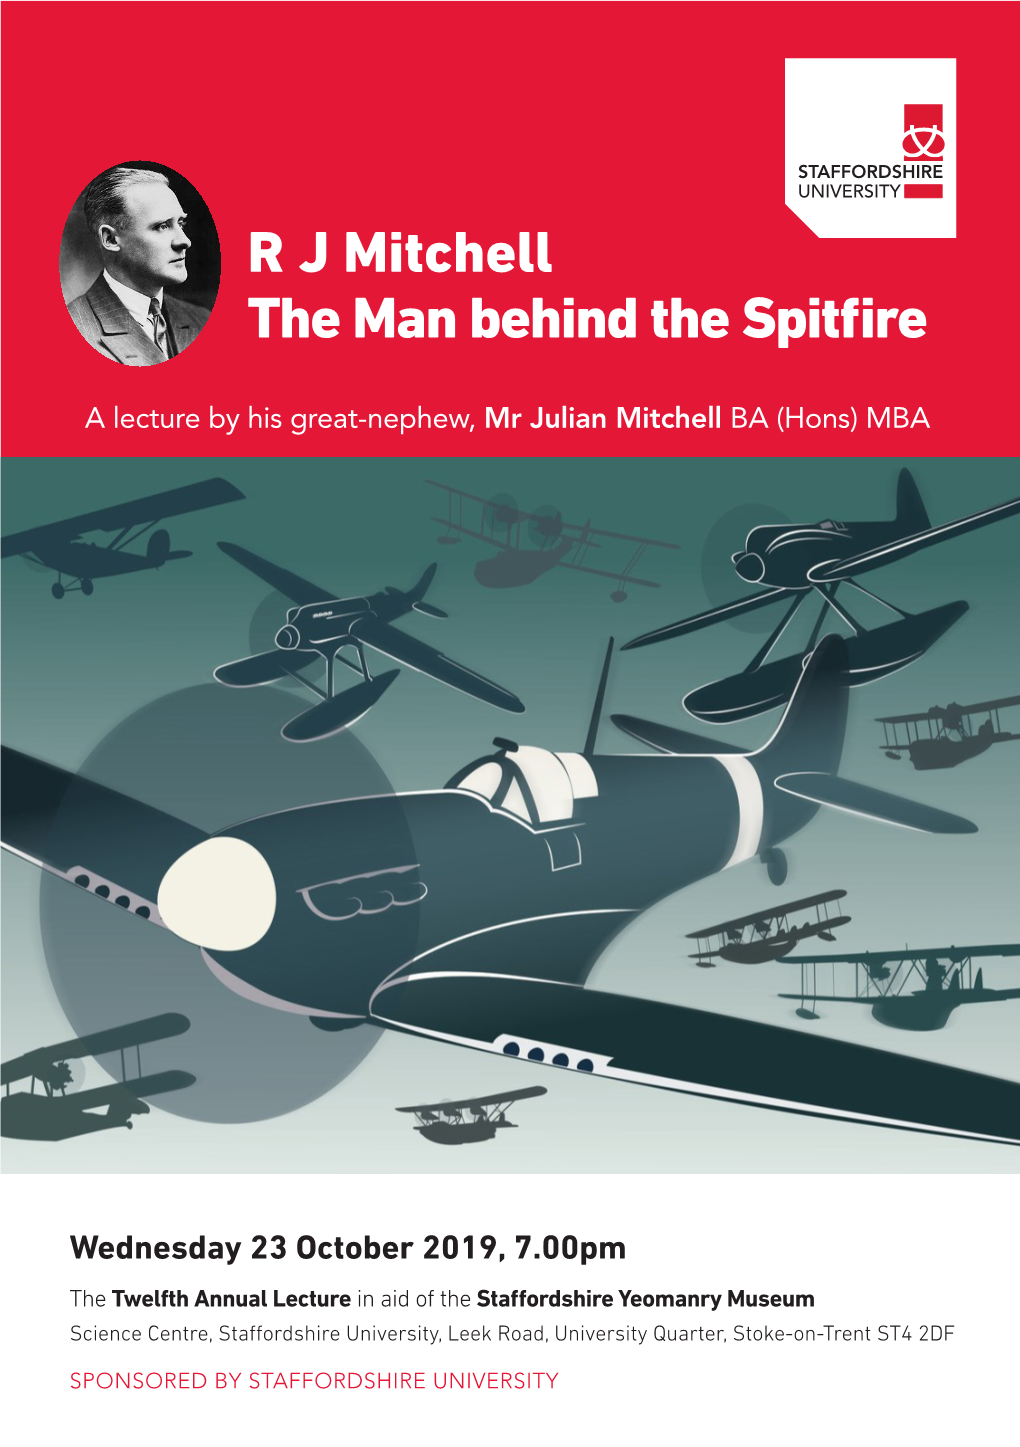 R J Mitchell the Man Behind the Spitfire